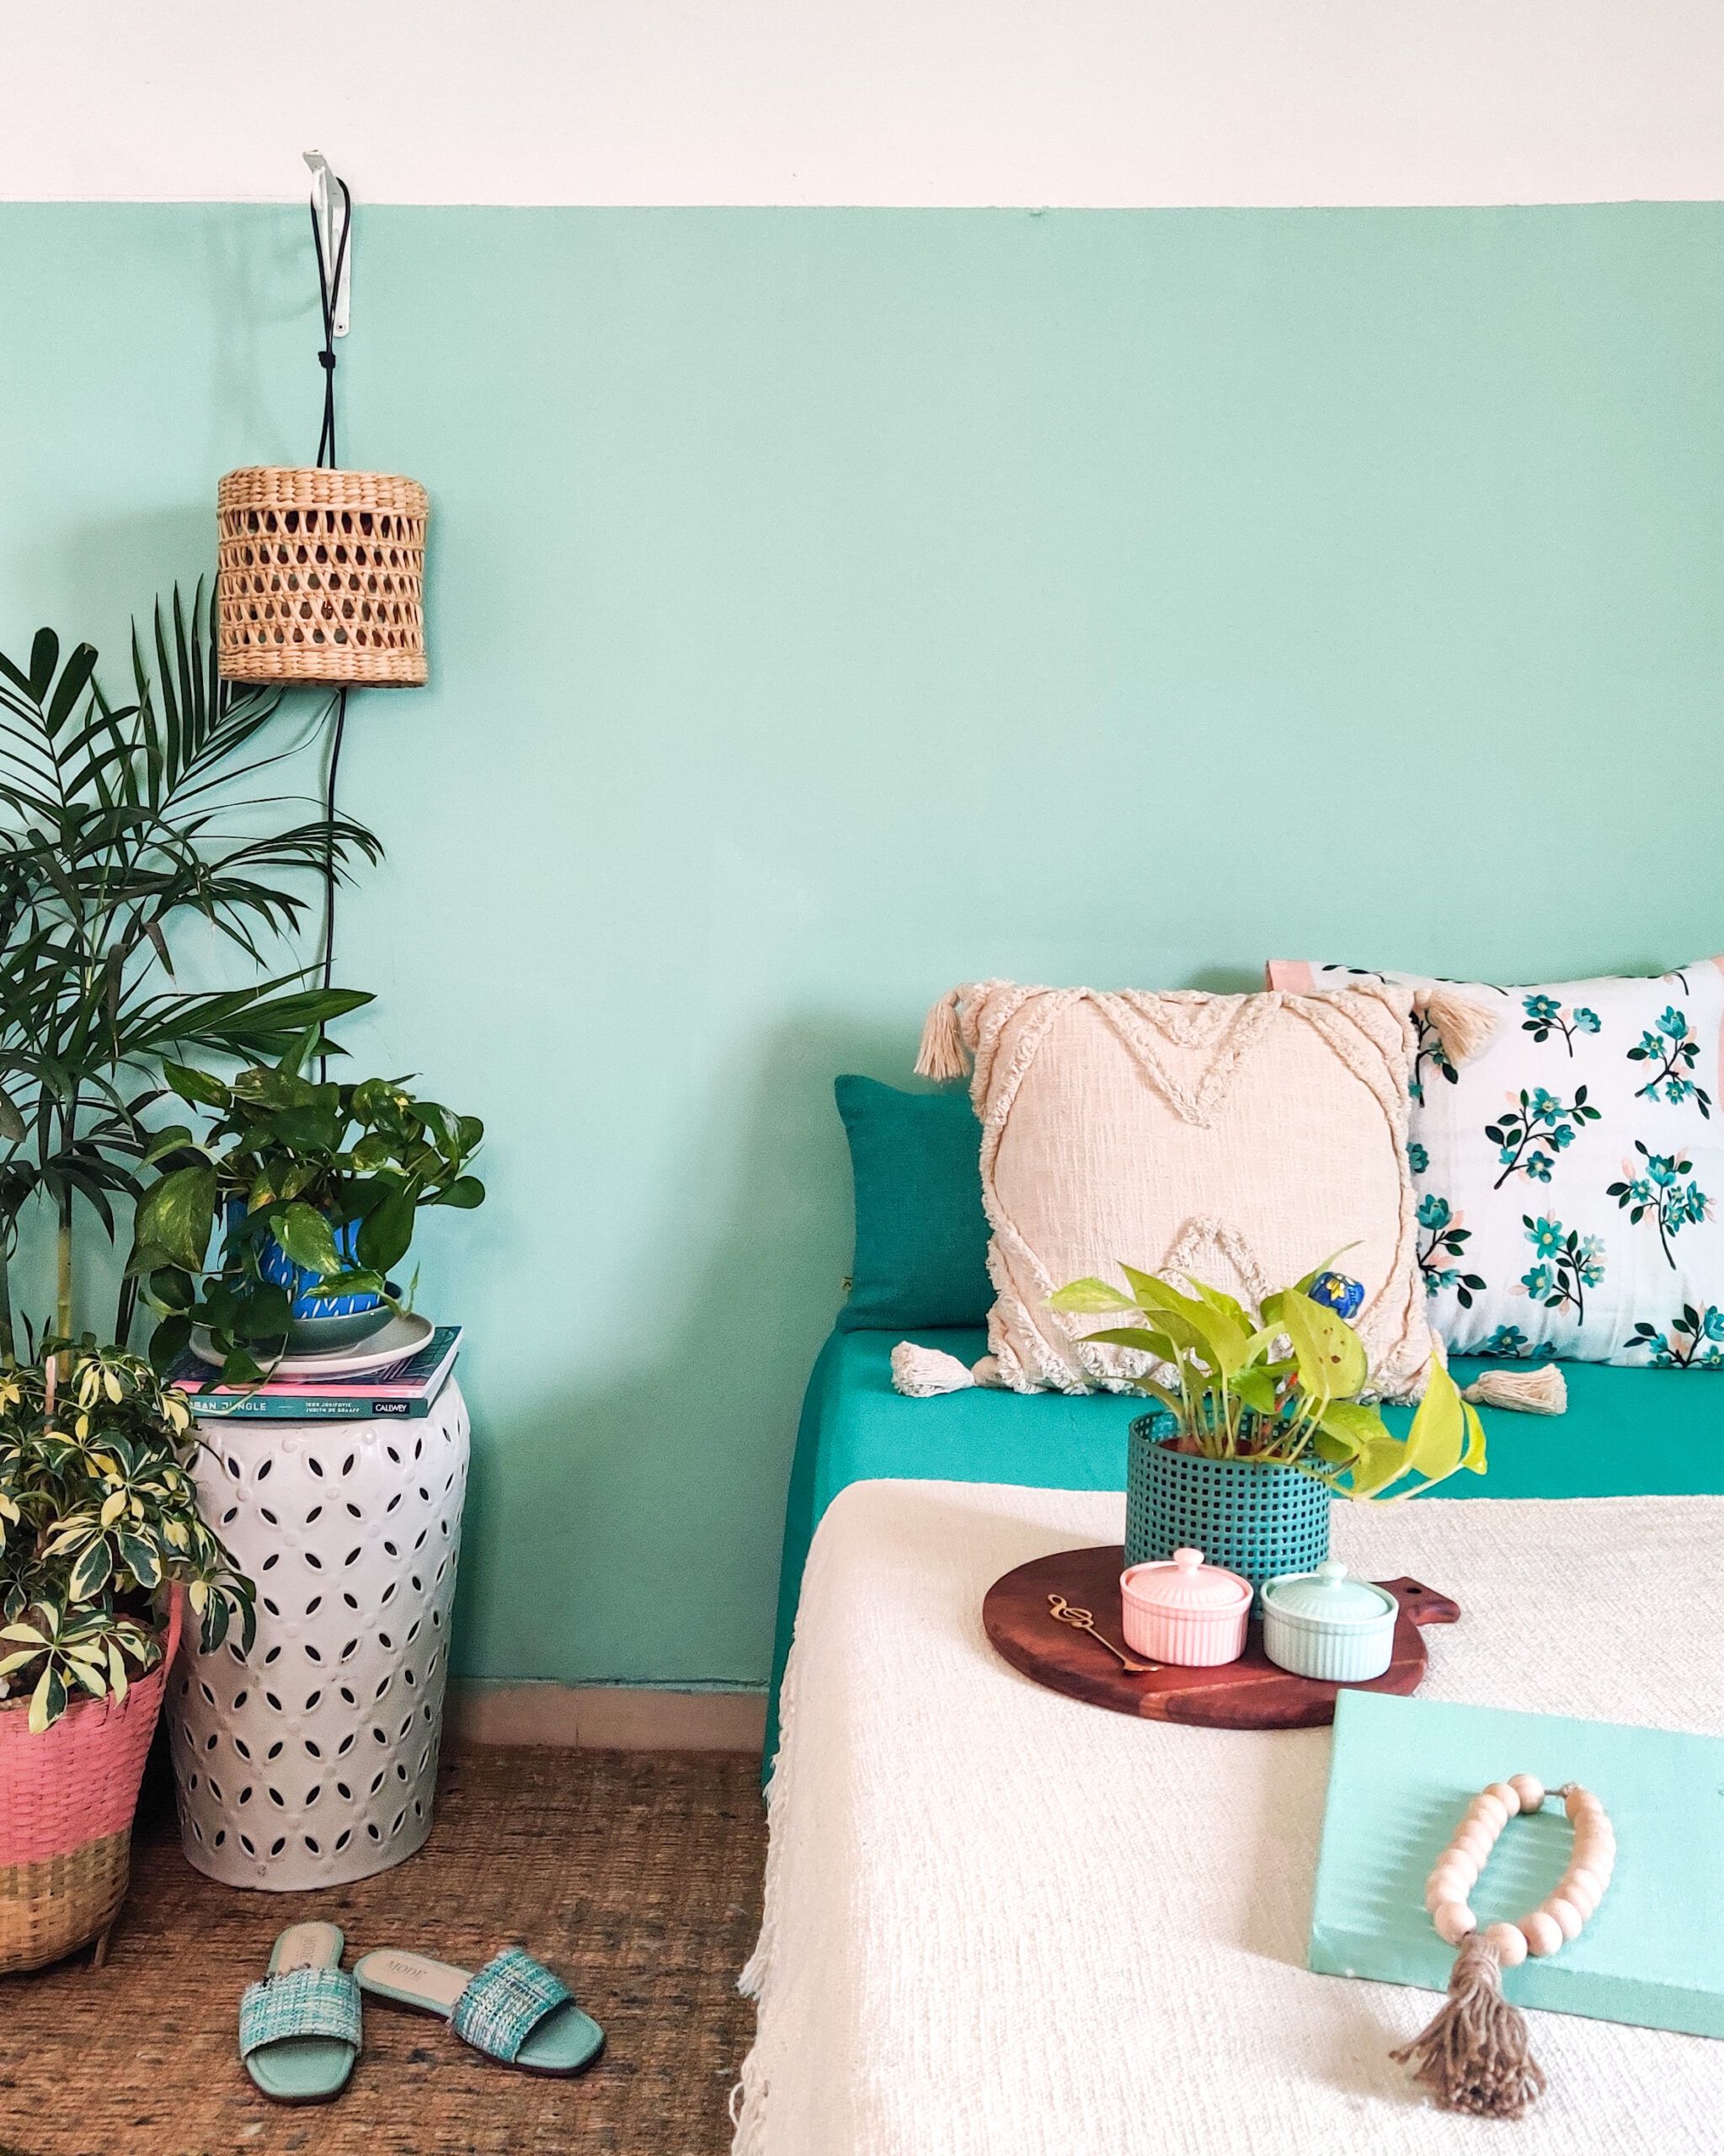 craft ideas for home decor-mint green wall-bed-planter